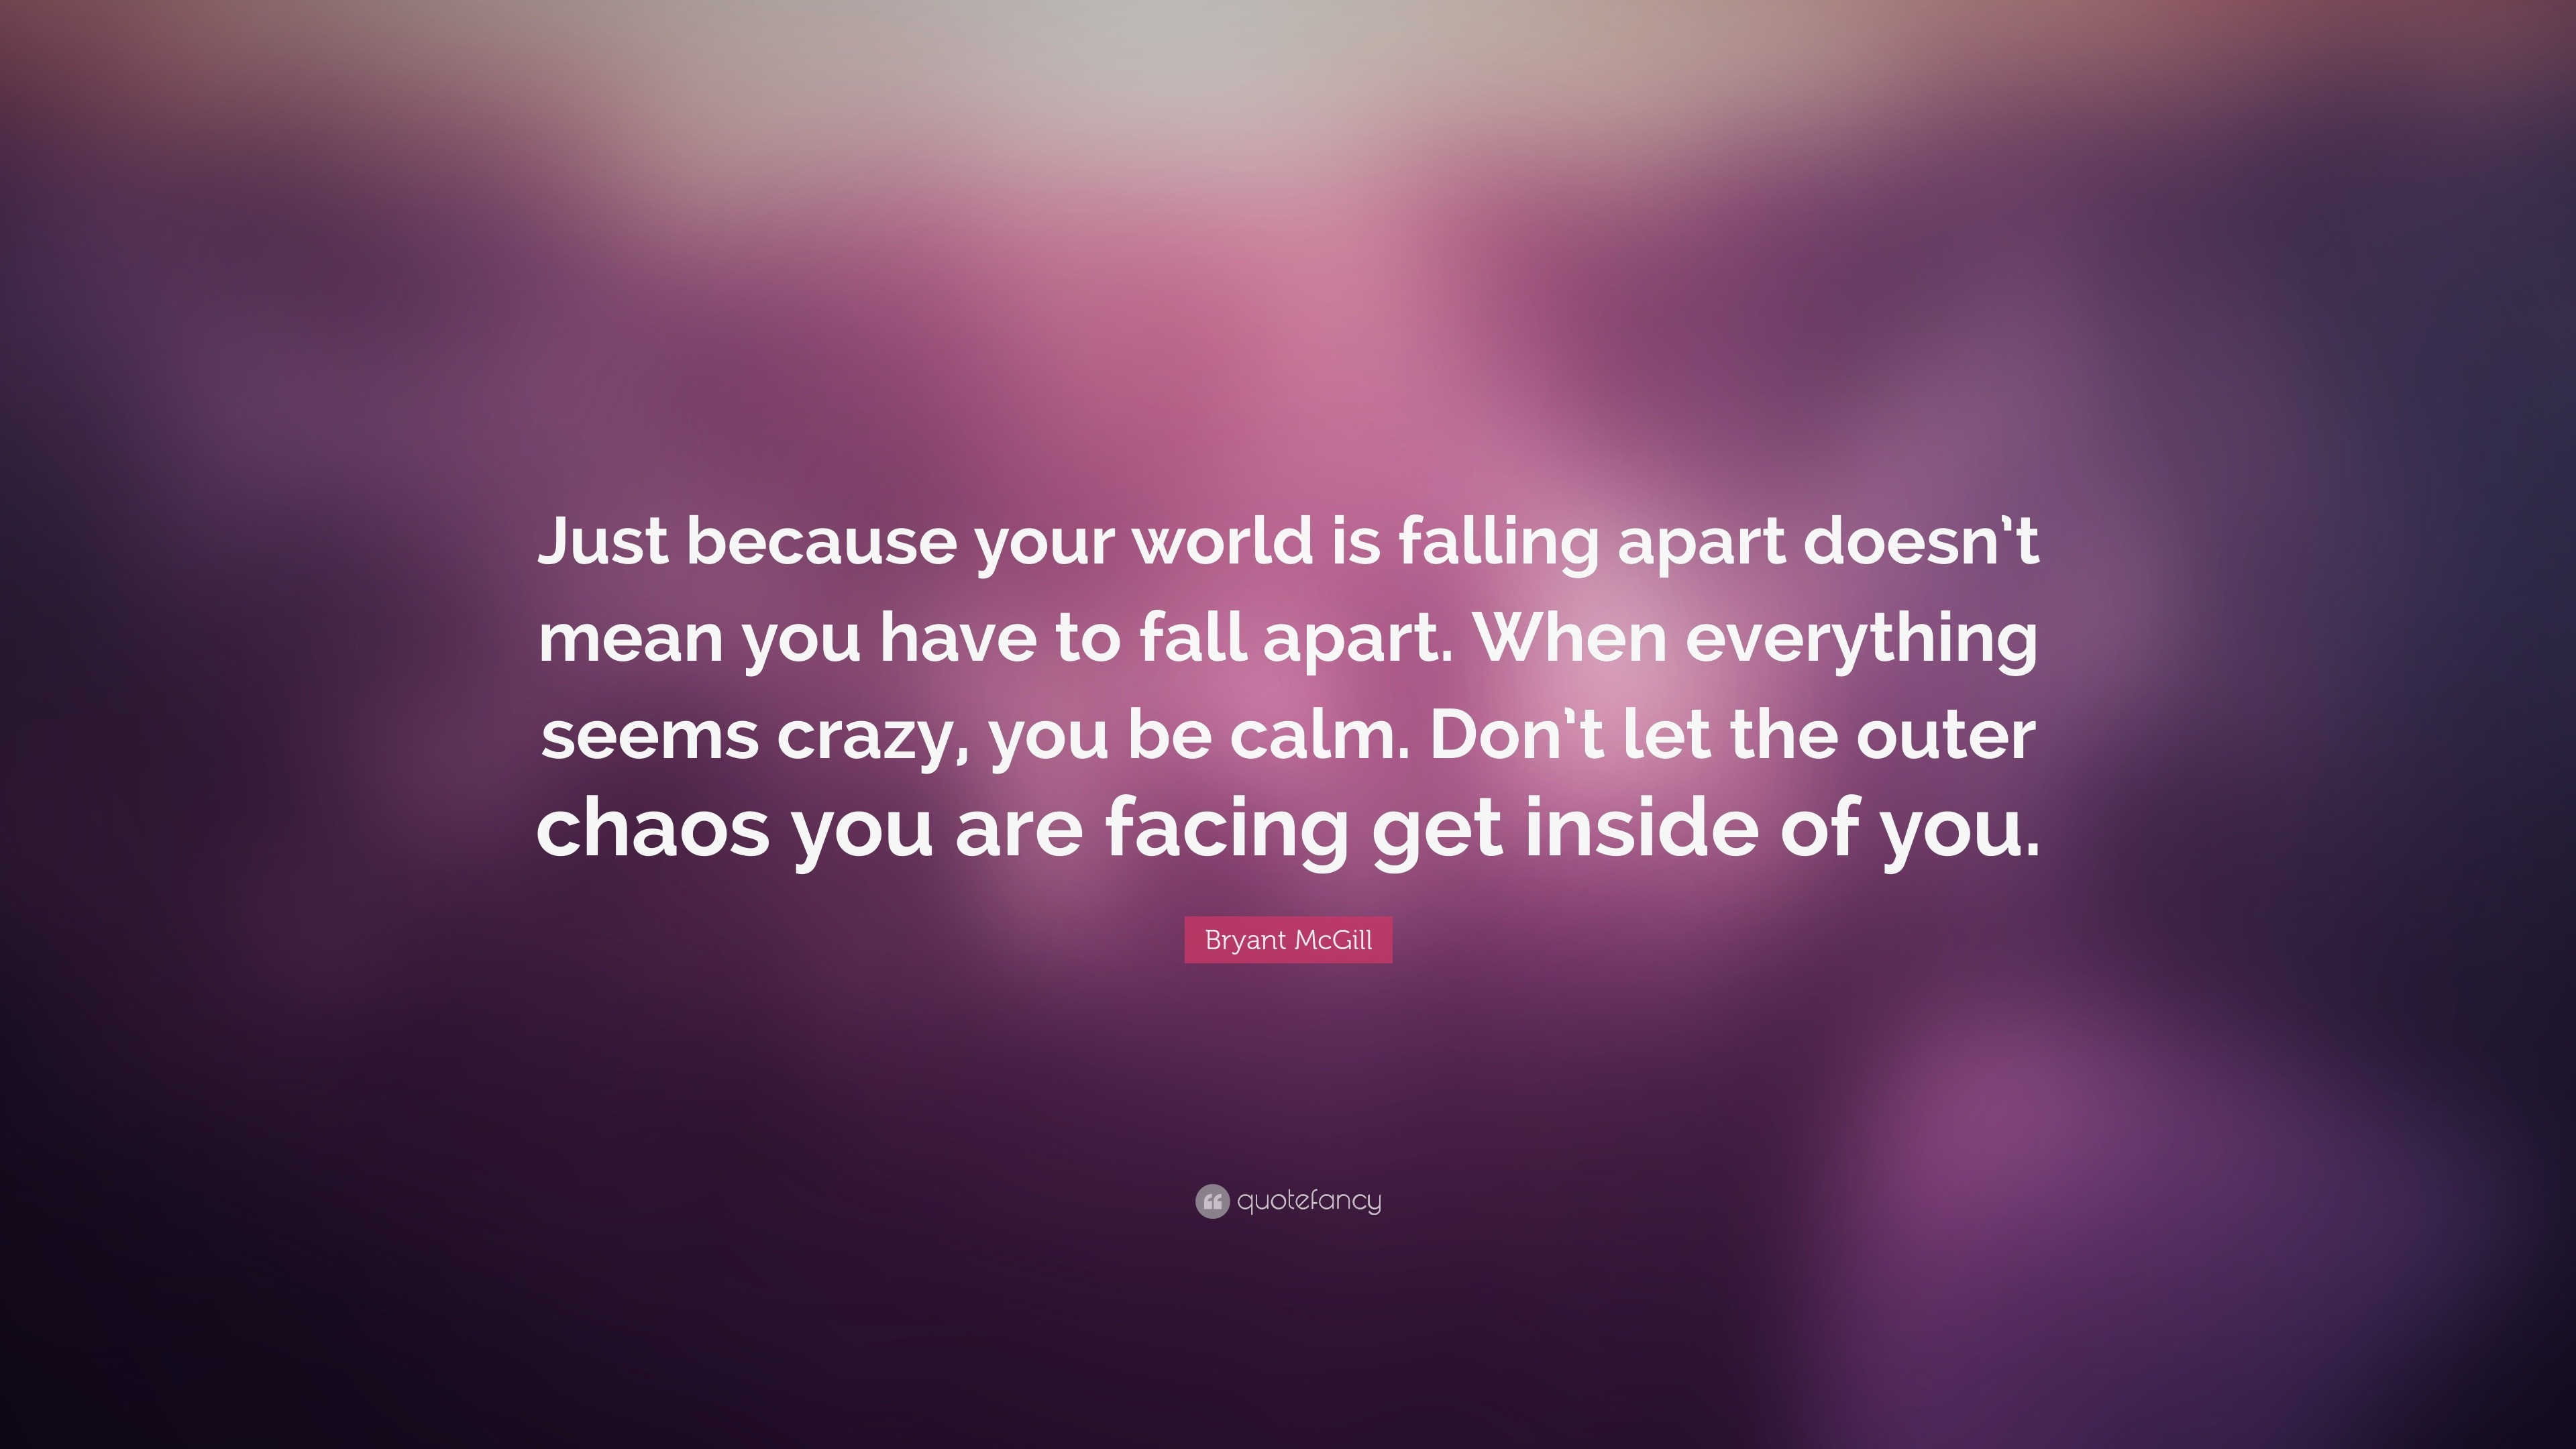 Bryant Mcgill Quote: “Just Because Your World Is Falling Apart Doesn't Mean You Have To Fall Apart. When Everything Seems Crazy, You Be Calm. ...”